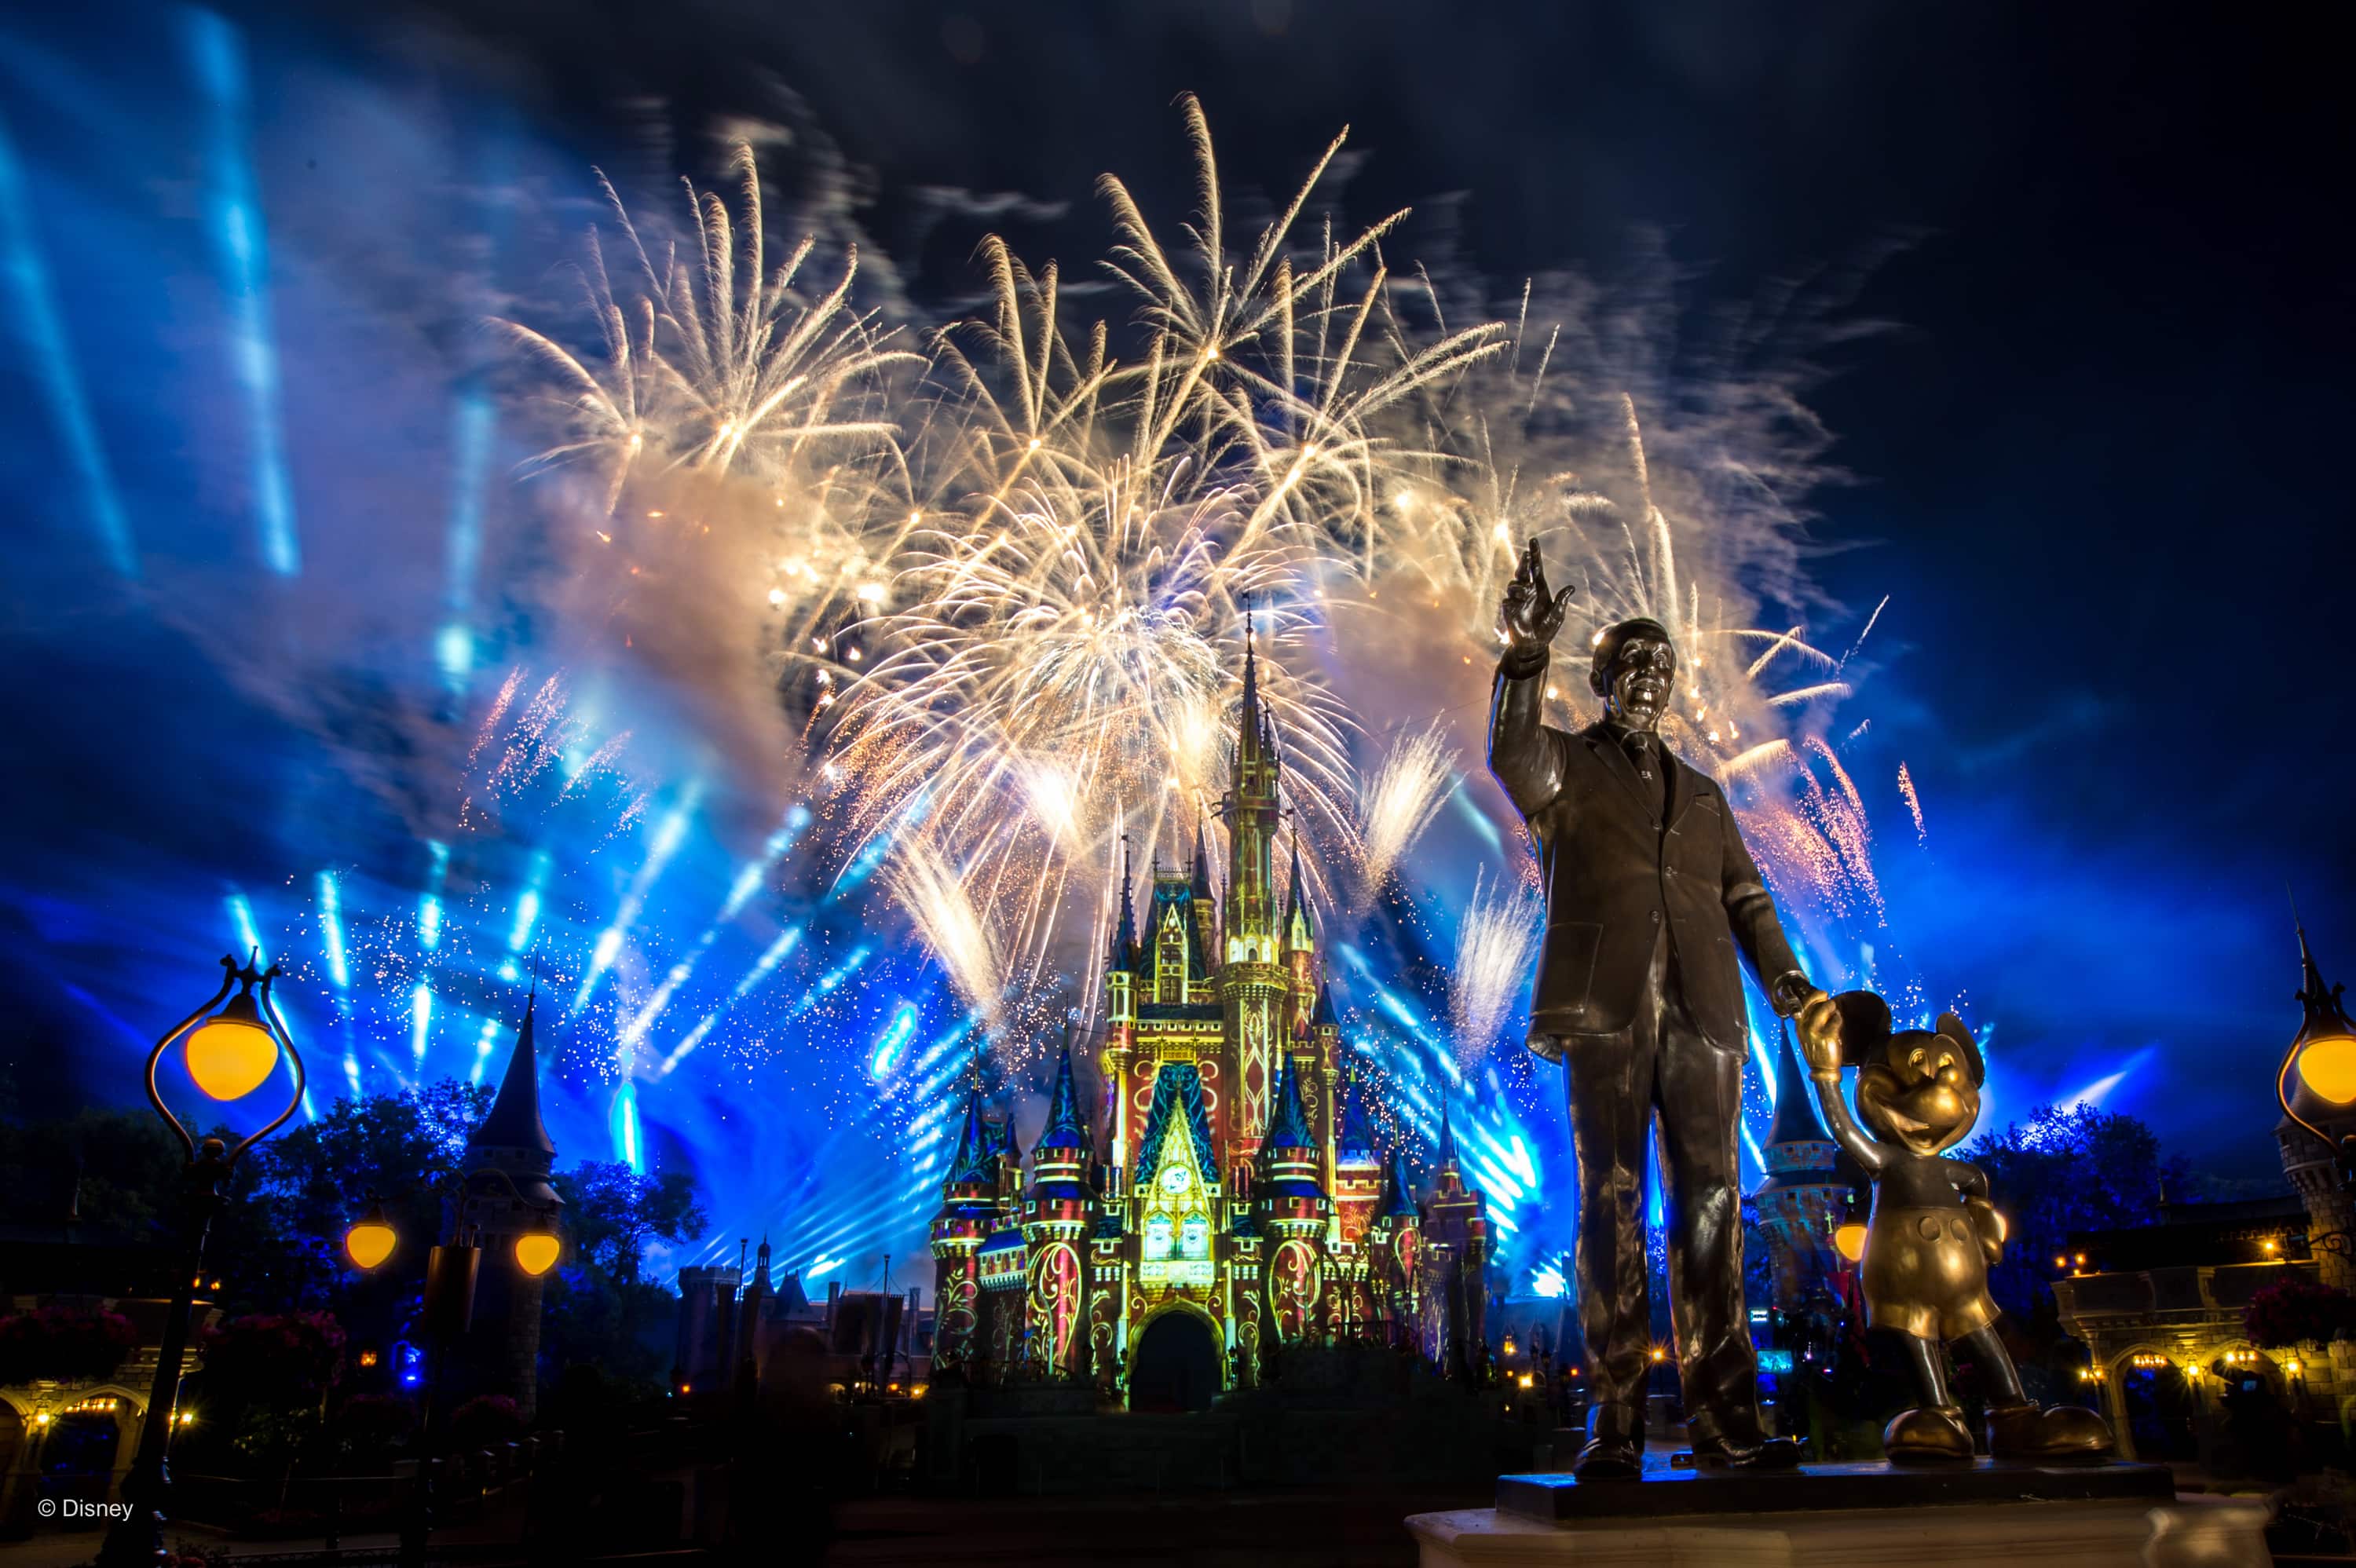 ‘Happily Ever After’ Returning to Magic Kingdom in 2023